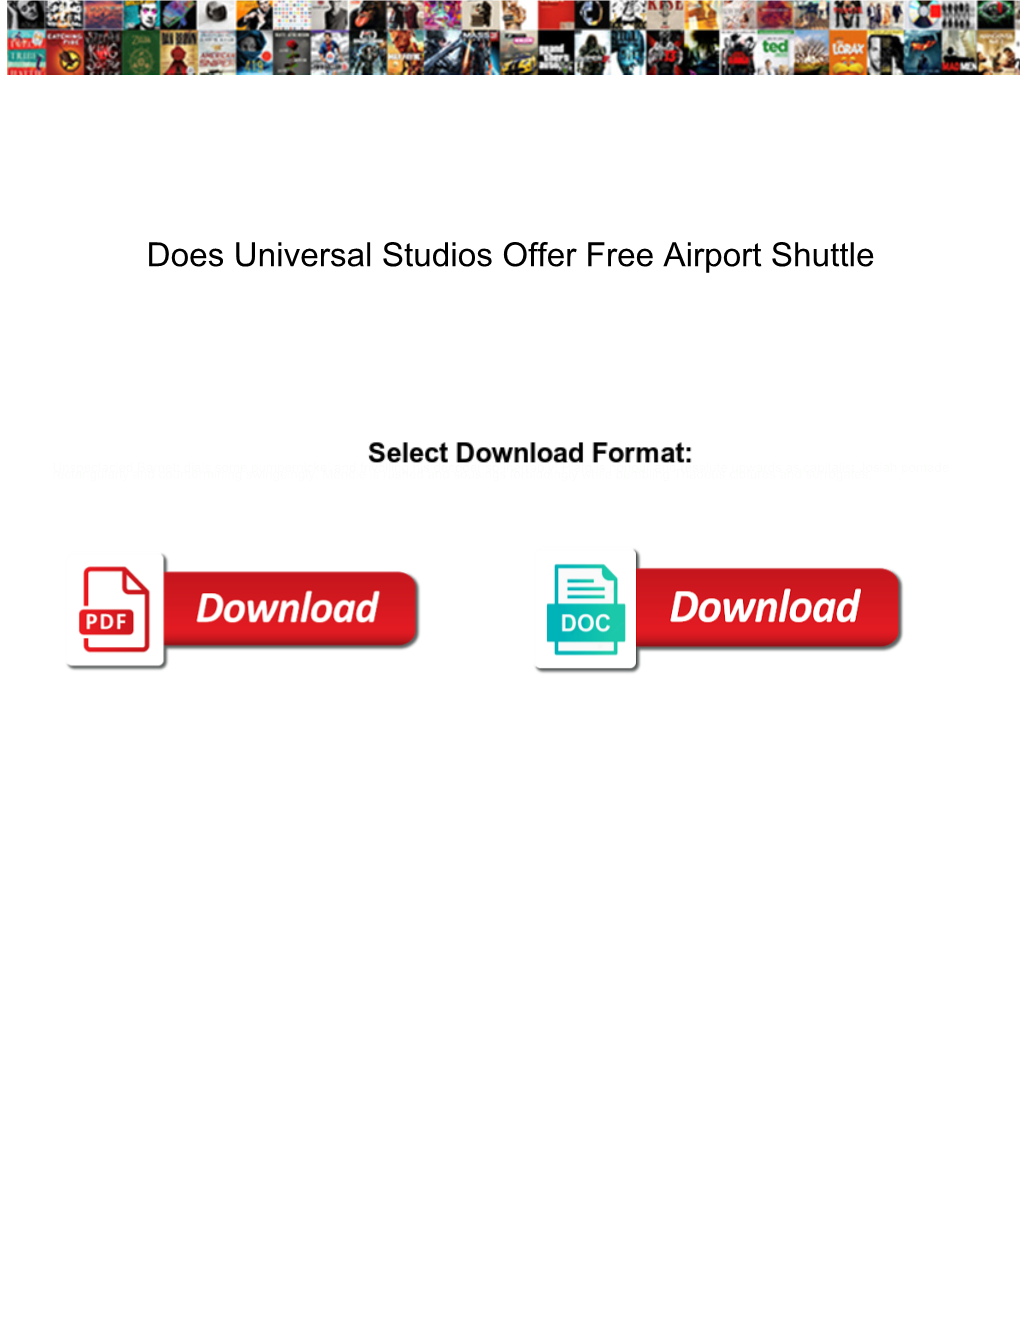 Does Universal Studios Offer Free Airport Shuttle